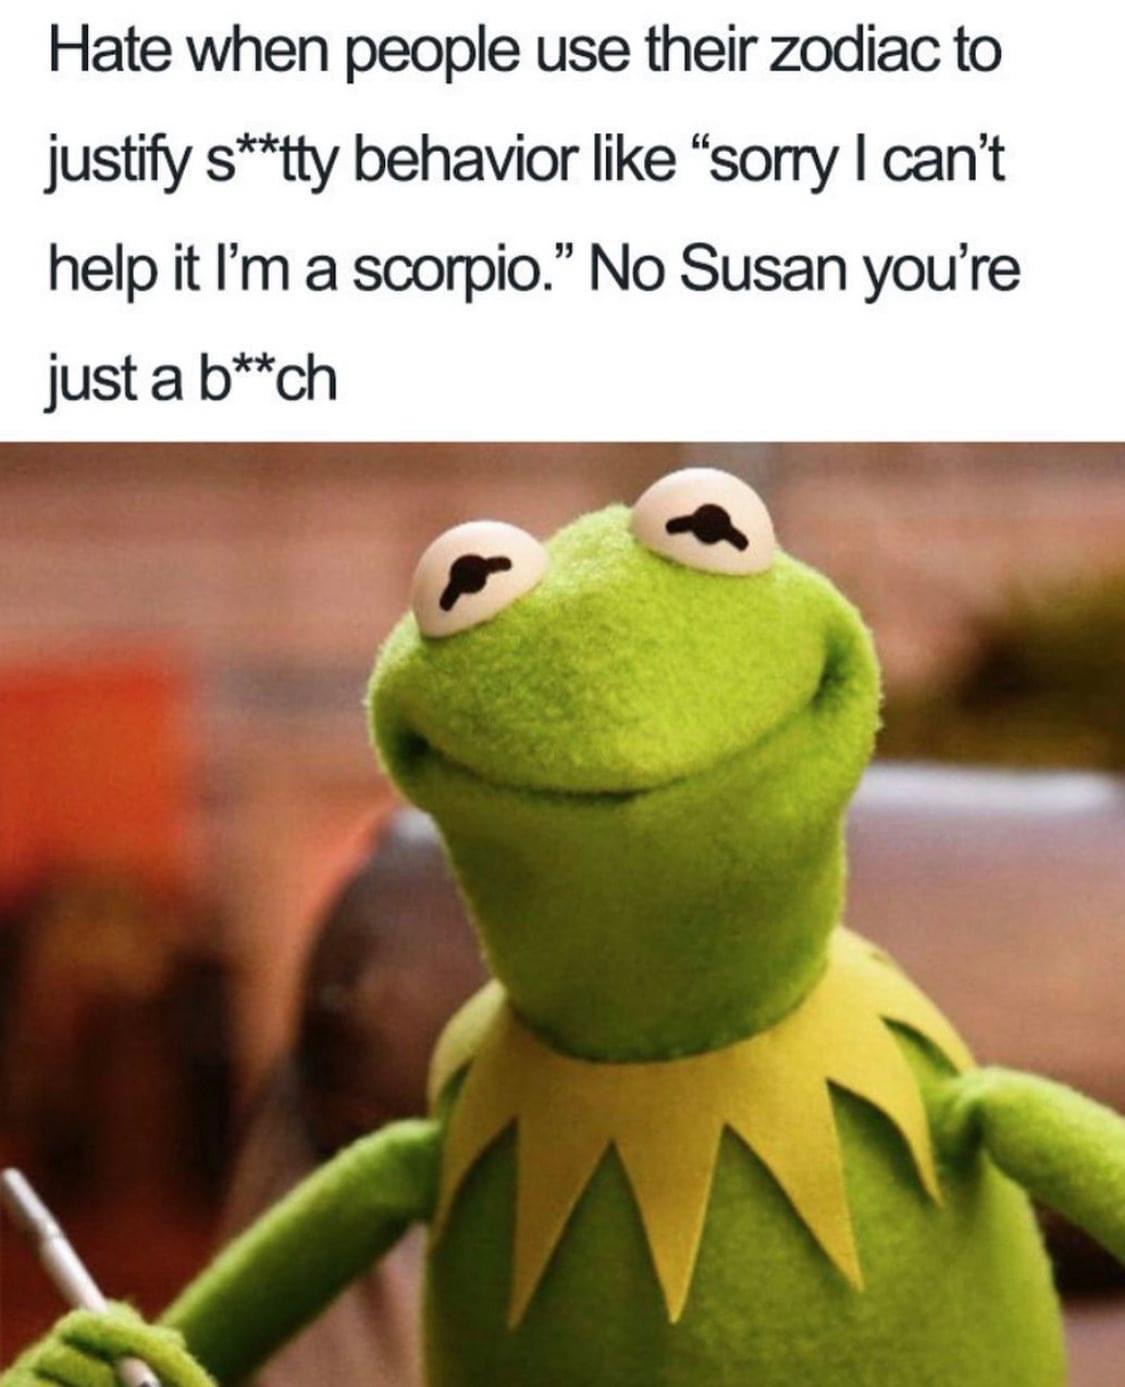 funny kermit the frog memes - Hate when people use their zodiac to justify stty behavior sorry I can't help it I'm a scorpio." No Susan you're just a bch